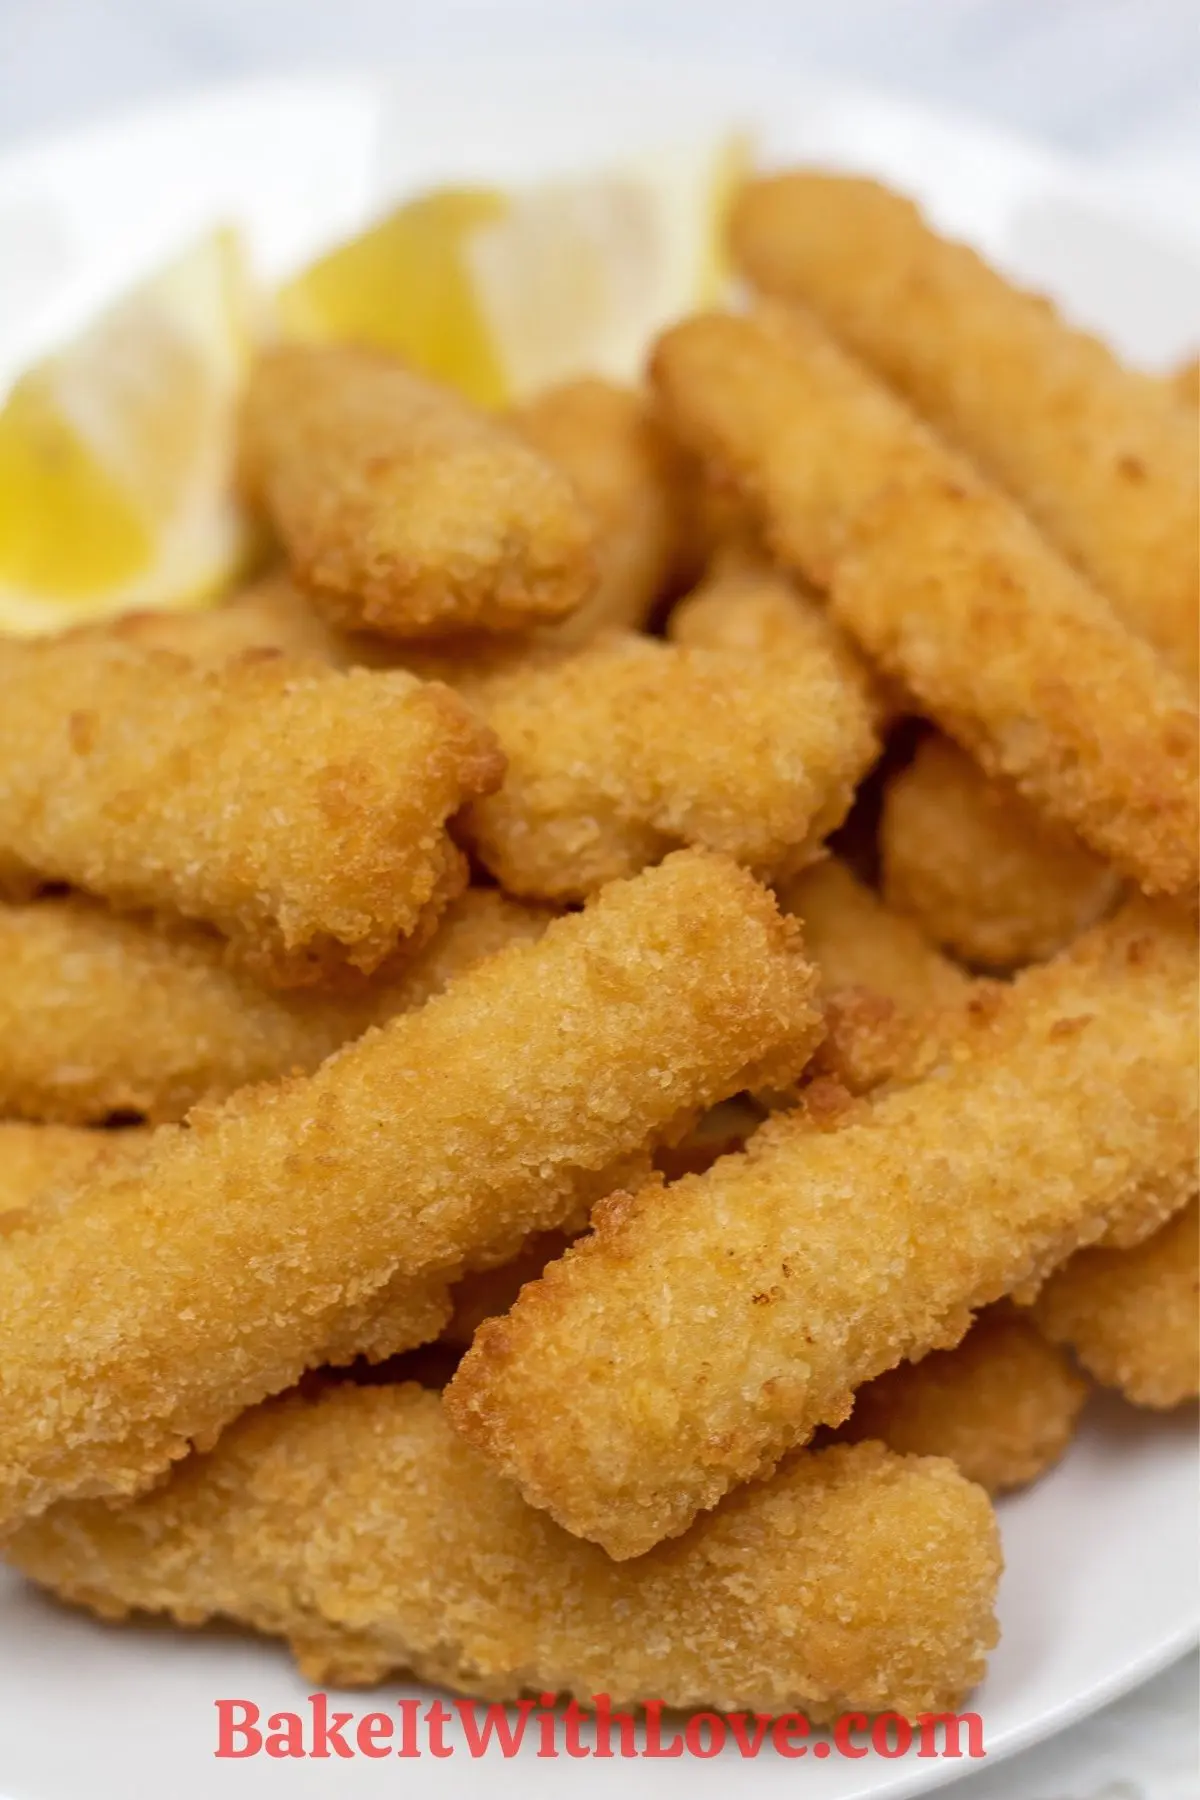 Fish sticks on a plate with lemon wedges.